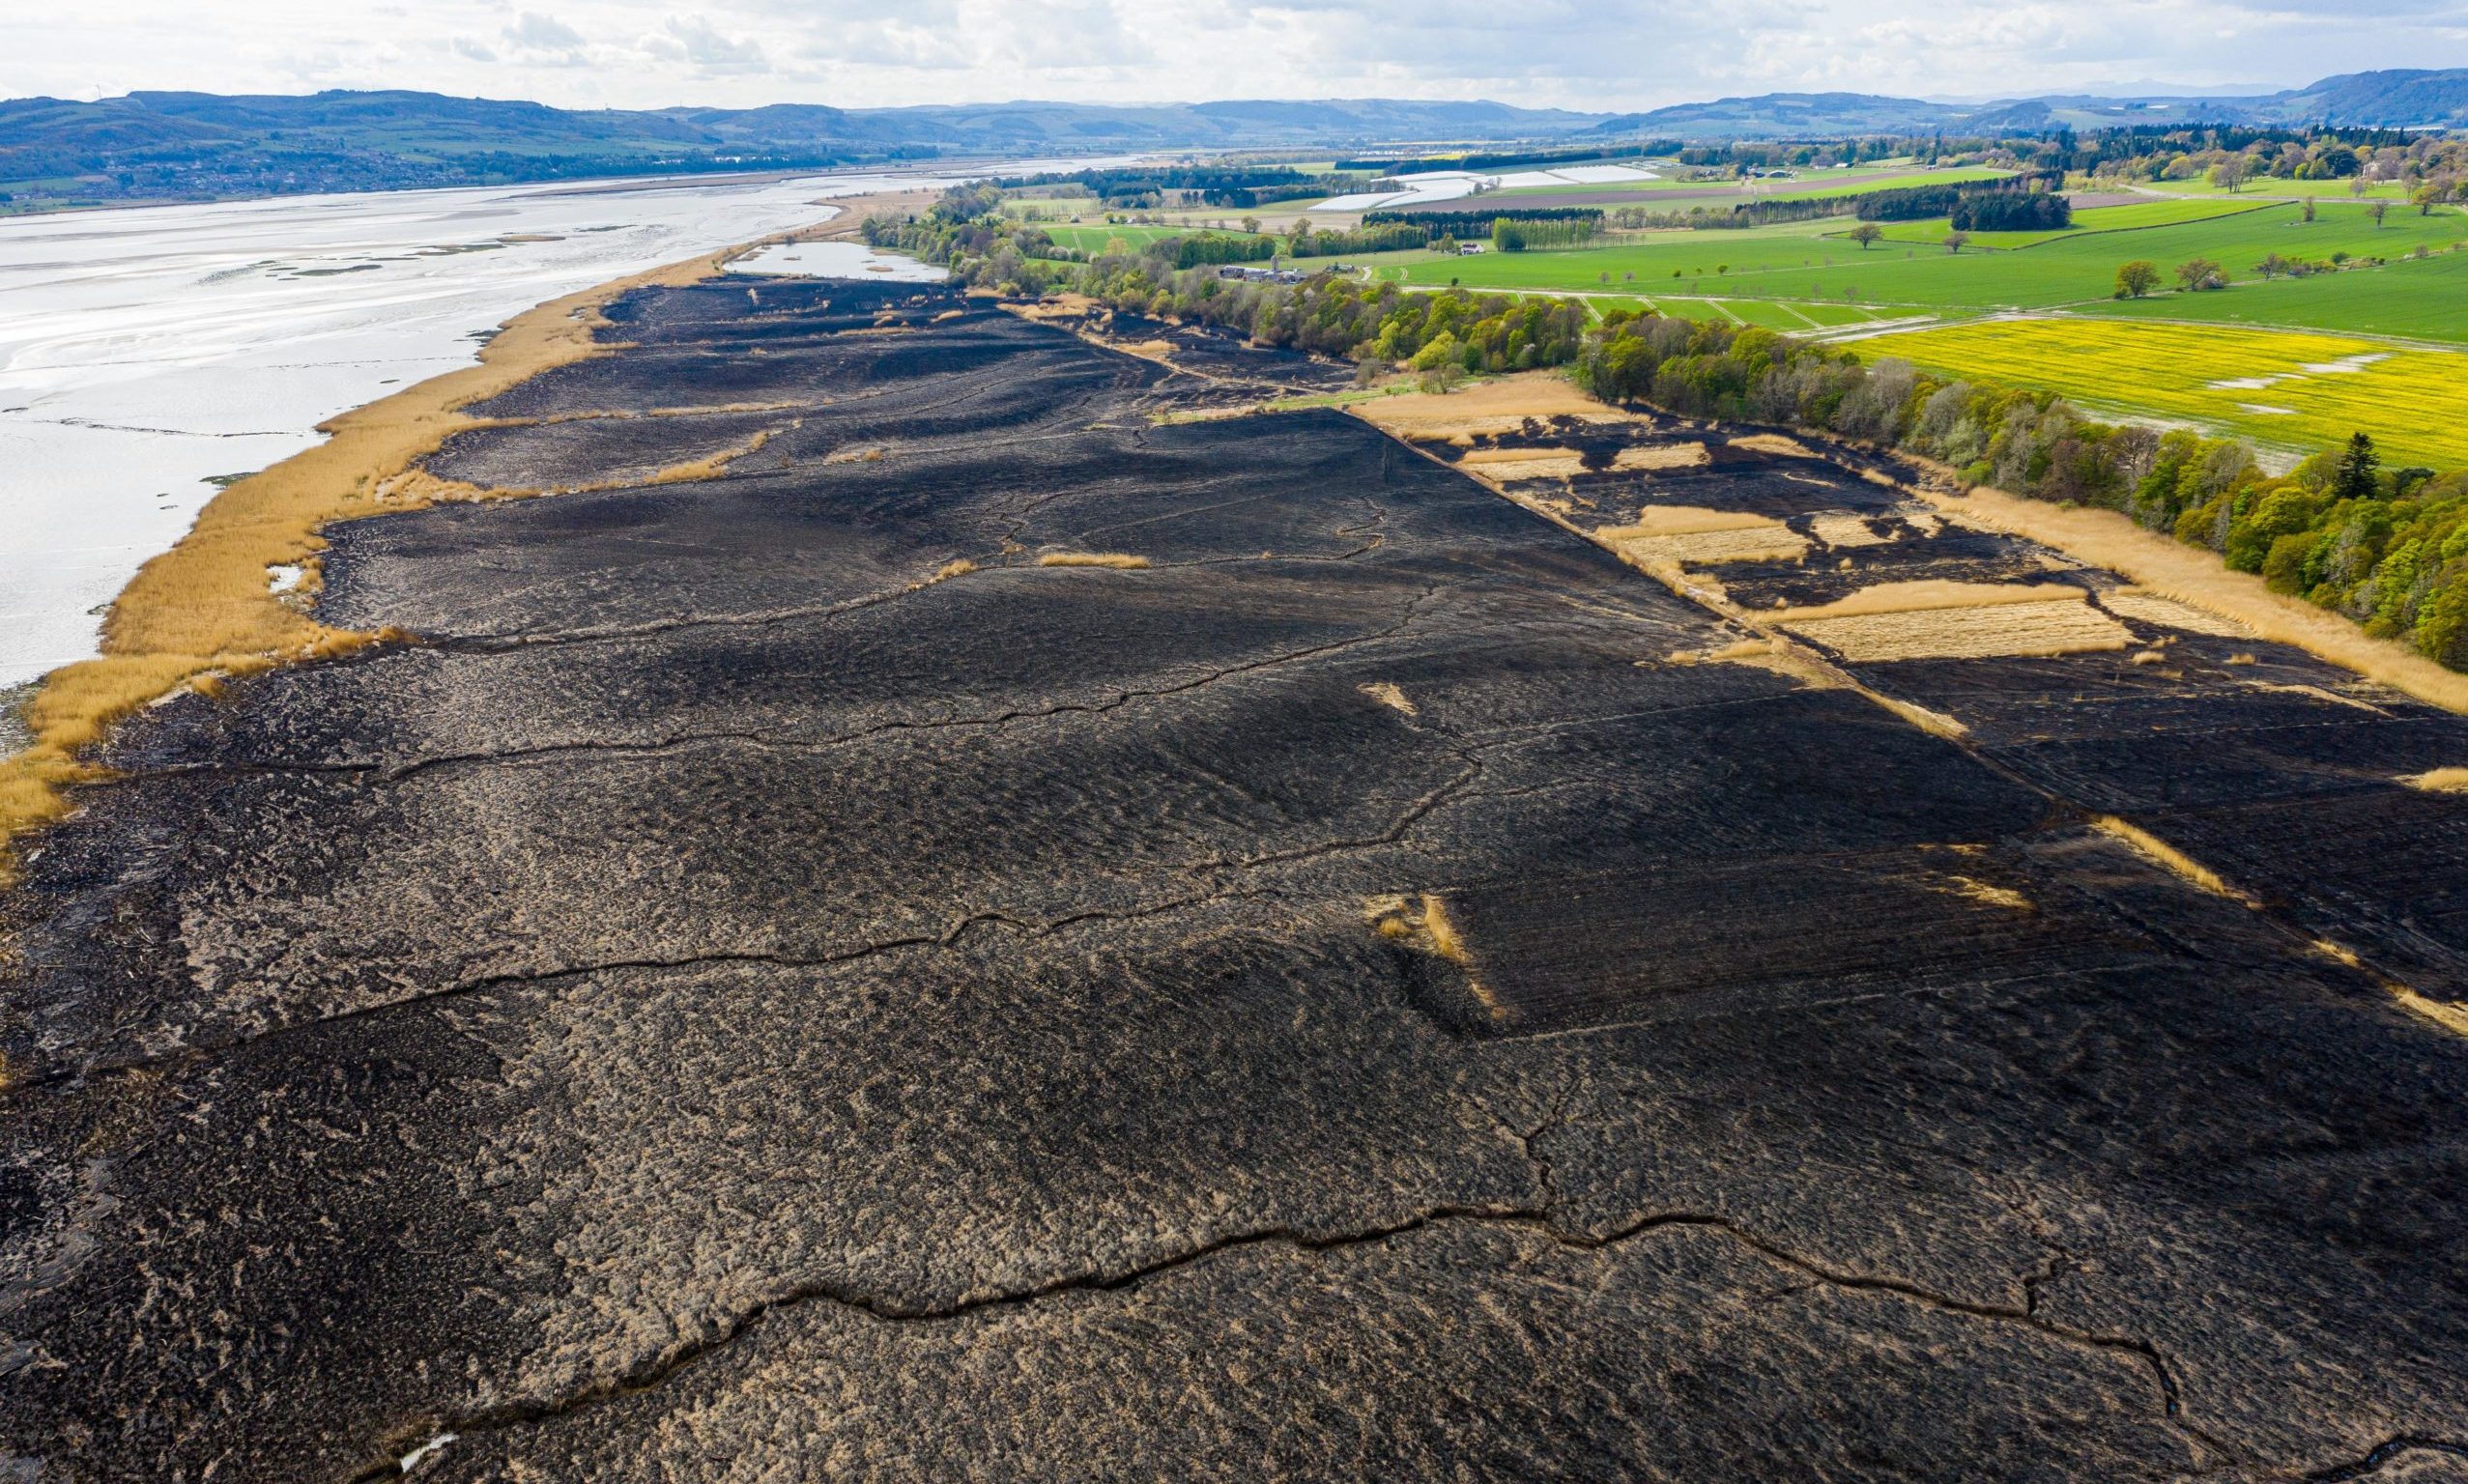 Photos showing the scale of the damage to the River Tay reed beds at Errol.